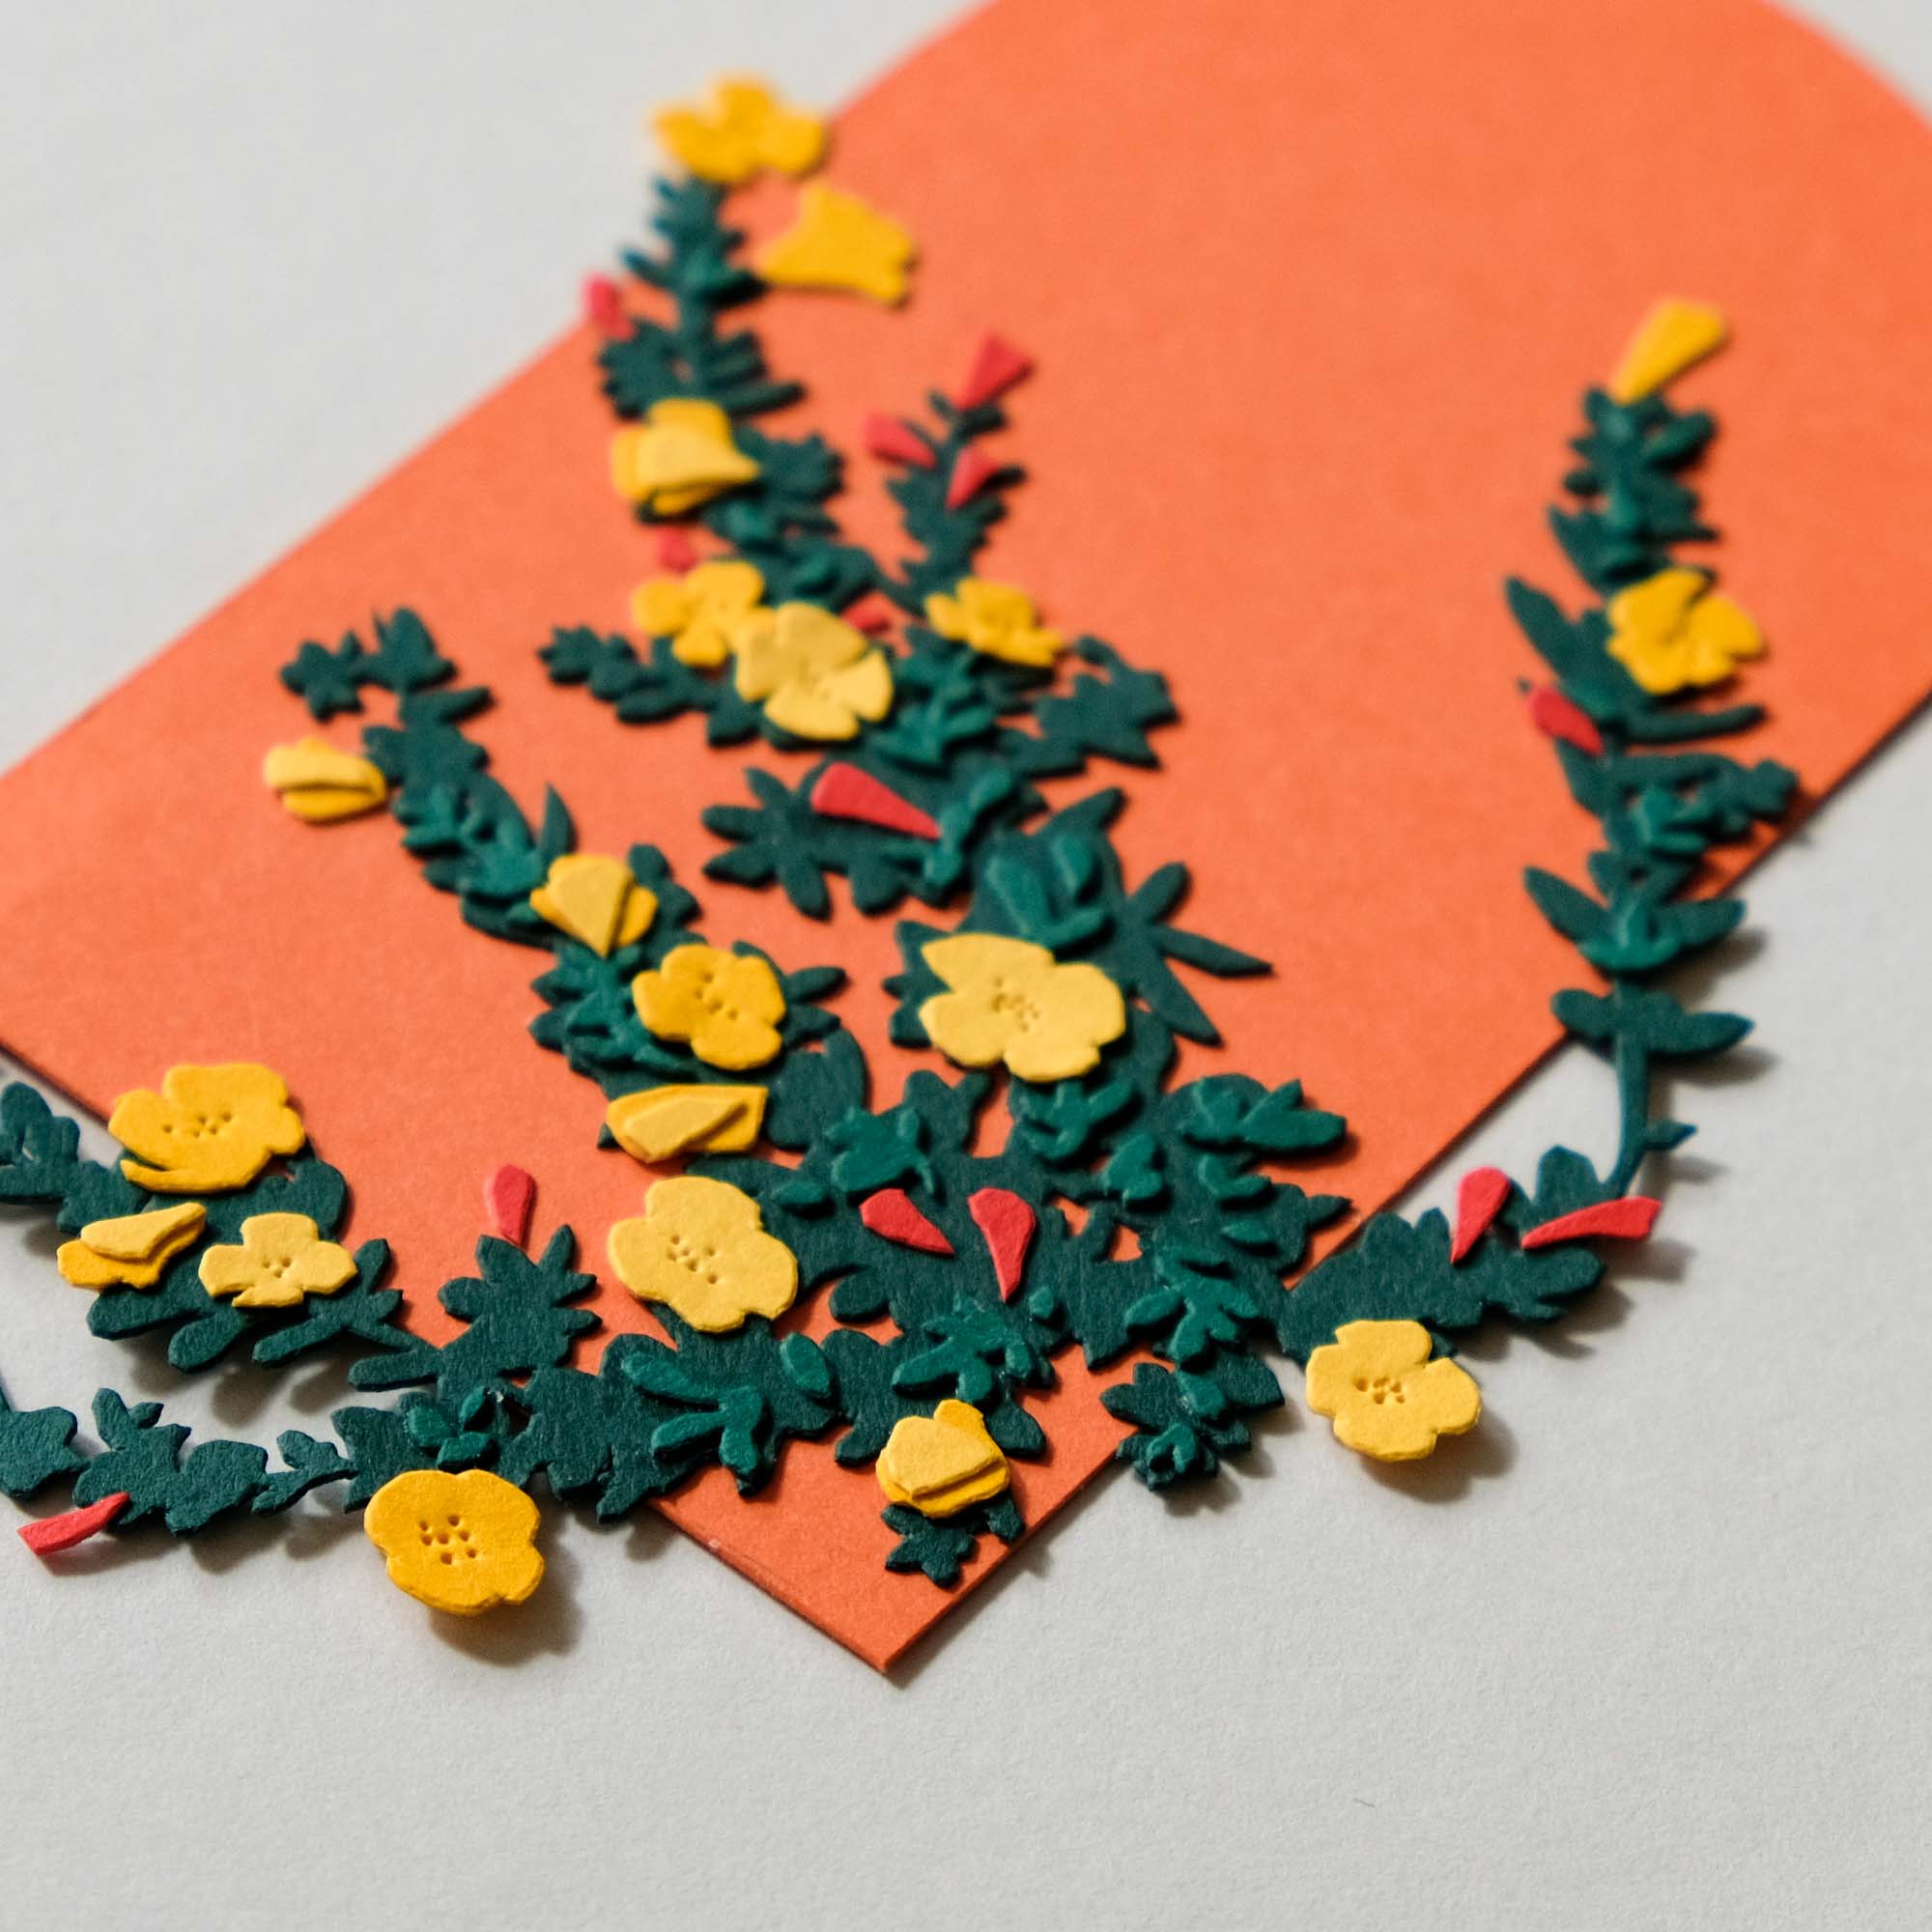 A paper beach primrose plant with yellow flowers sits on an arched orange background.